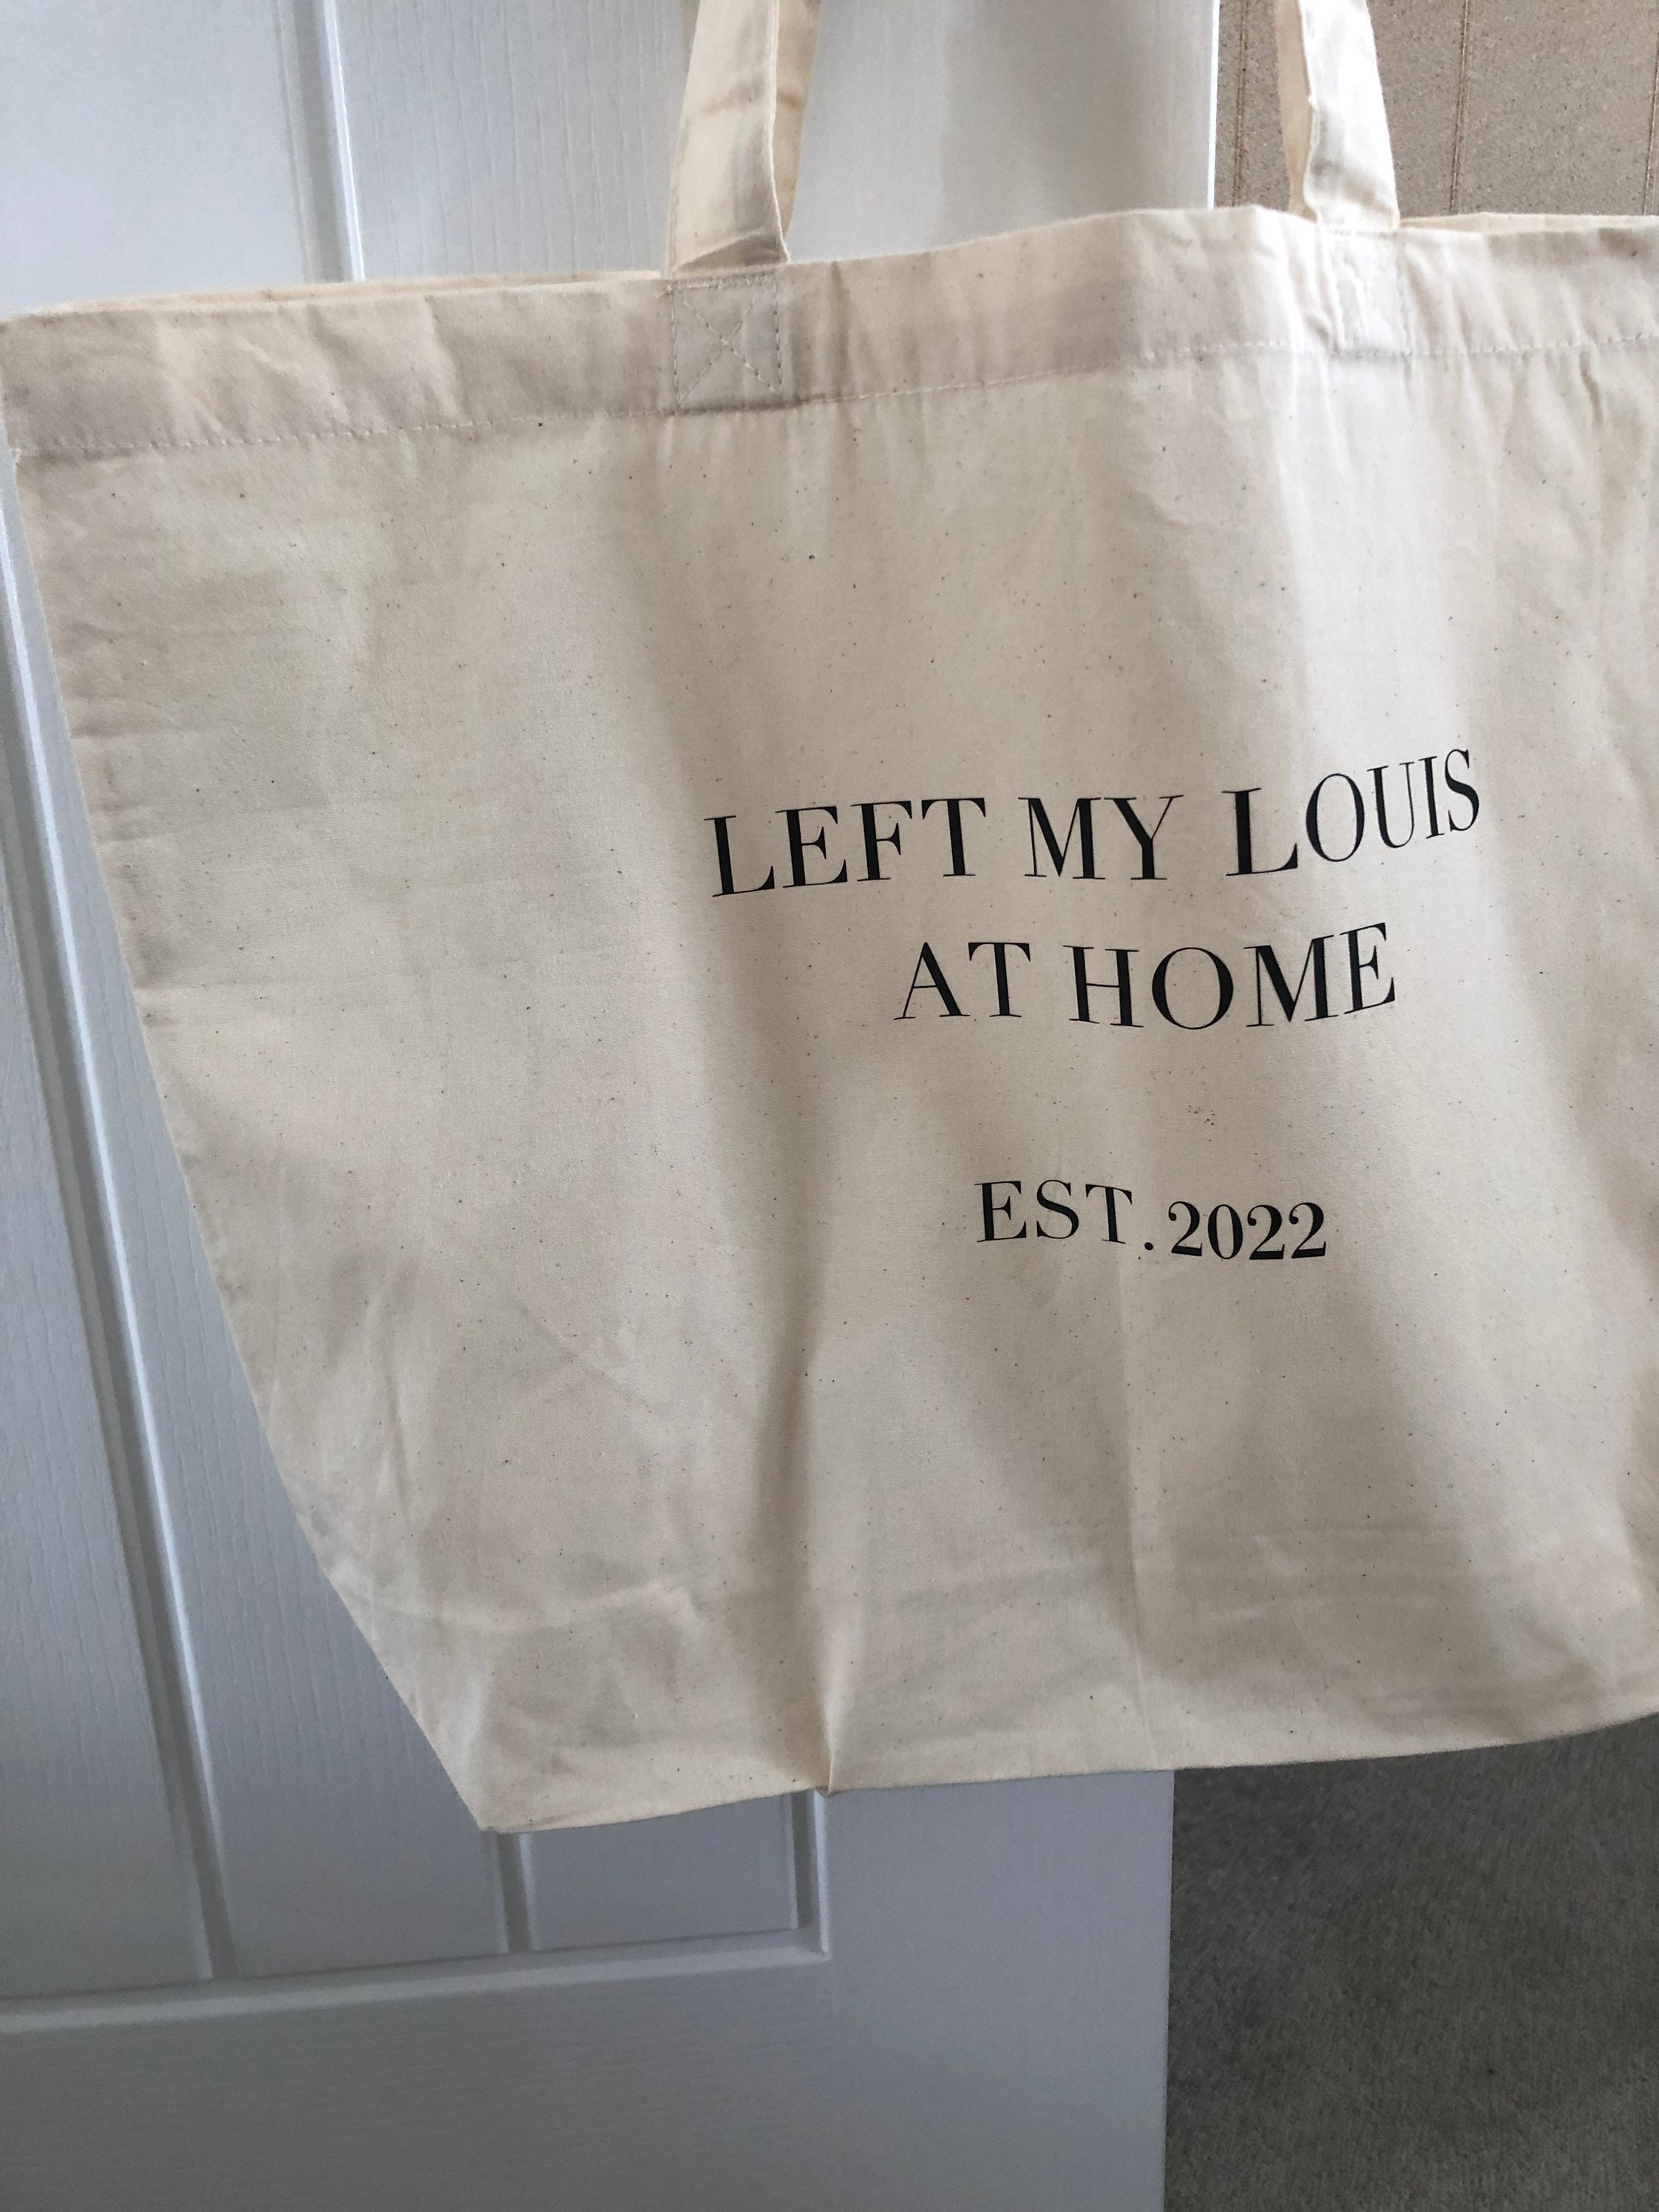 Left my Louis at home